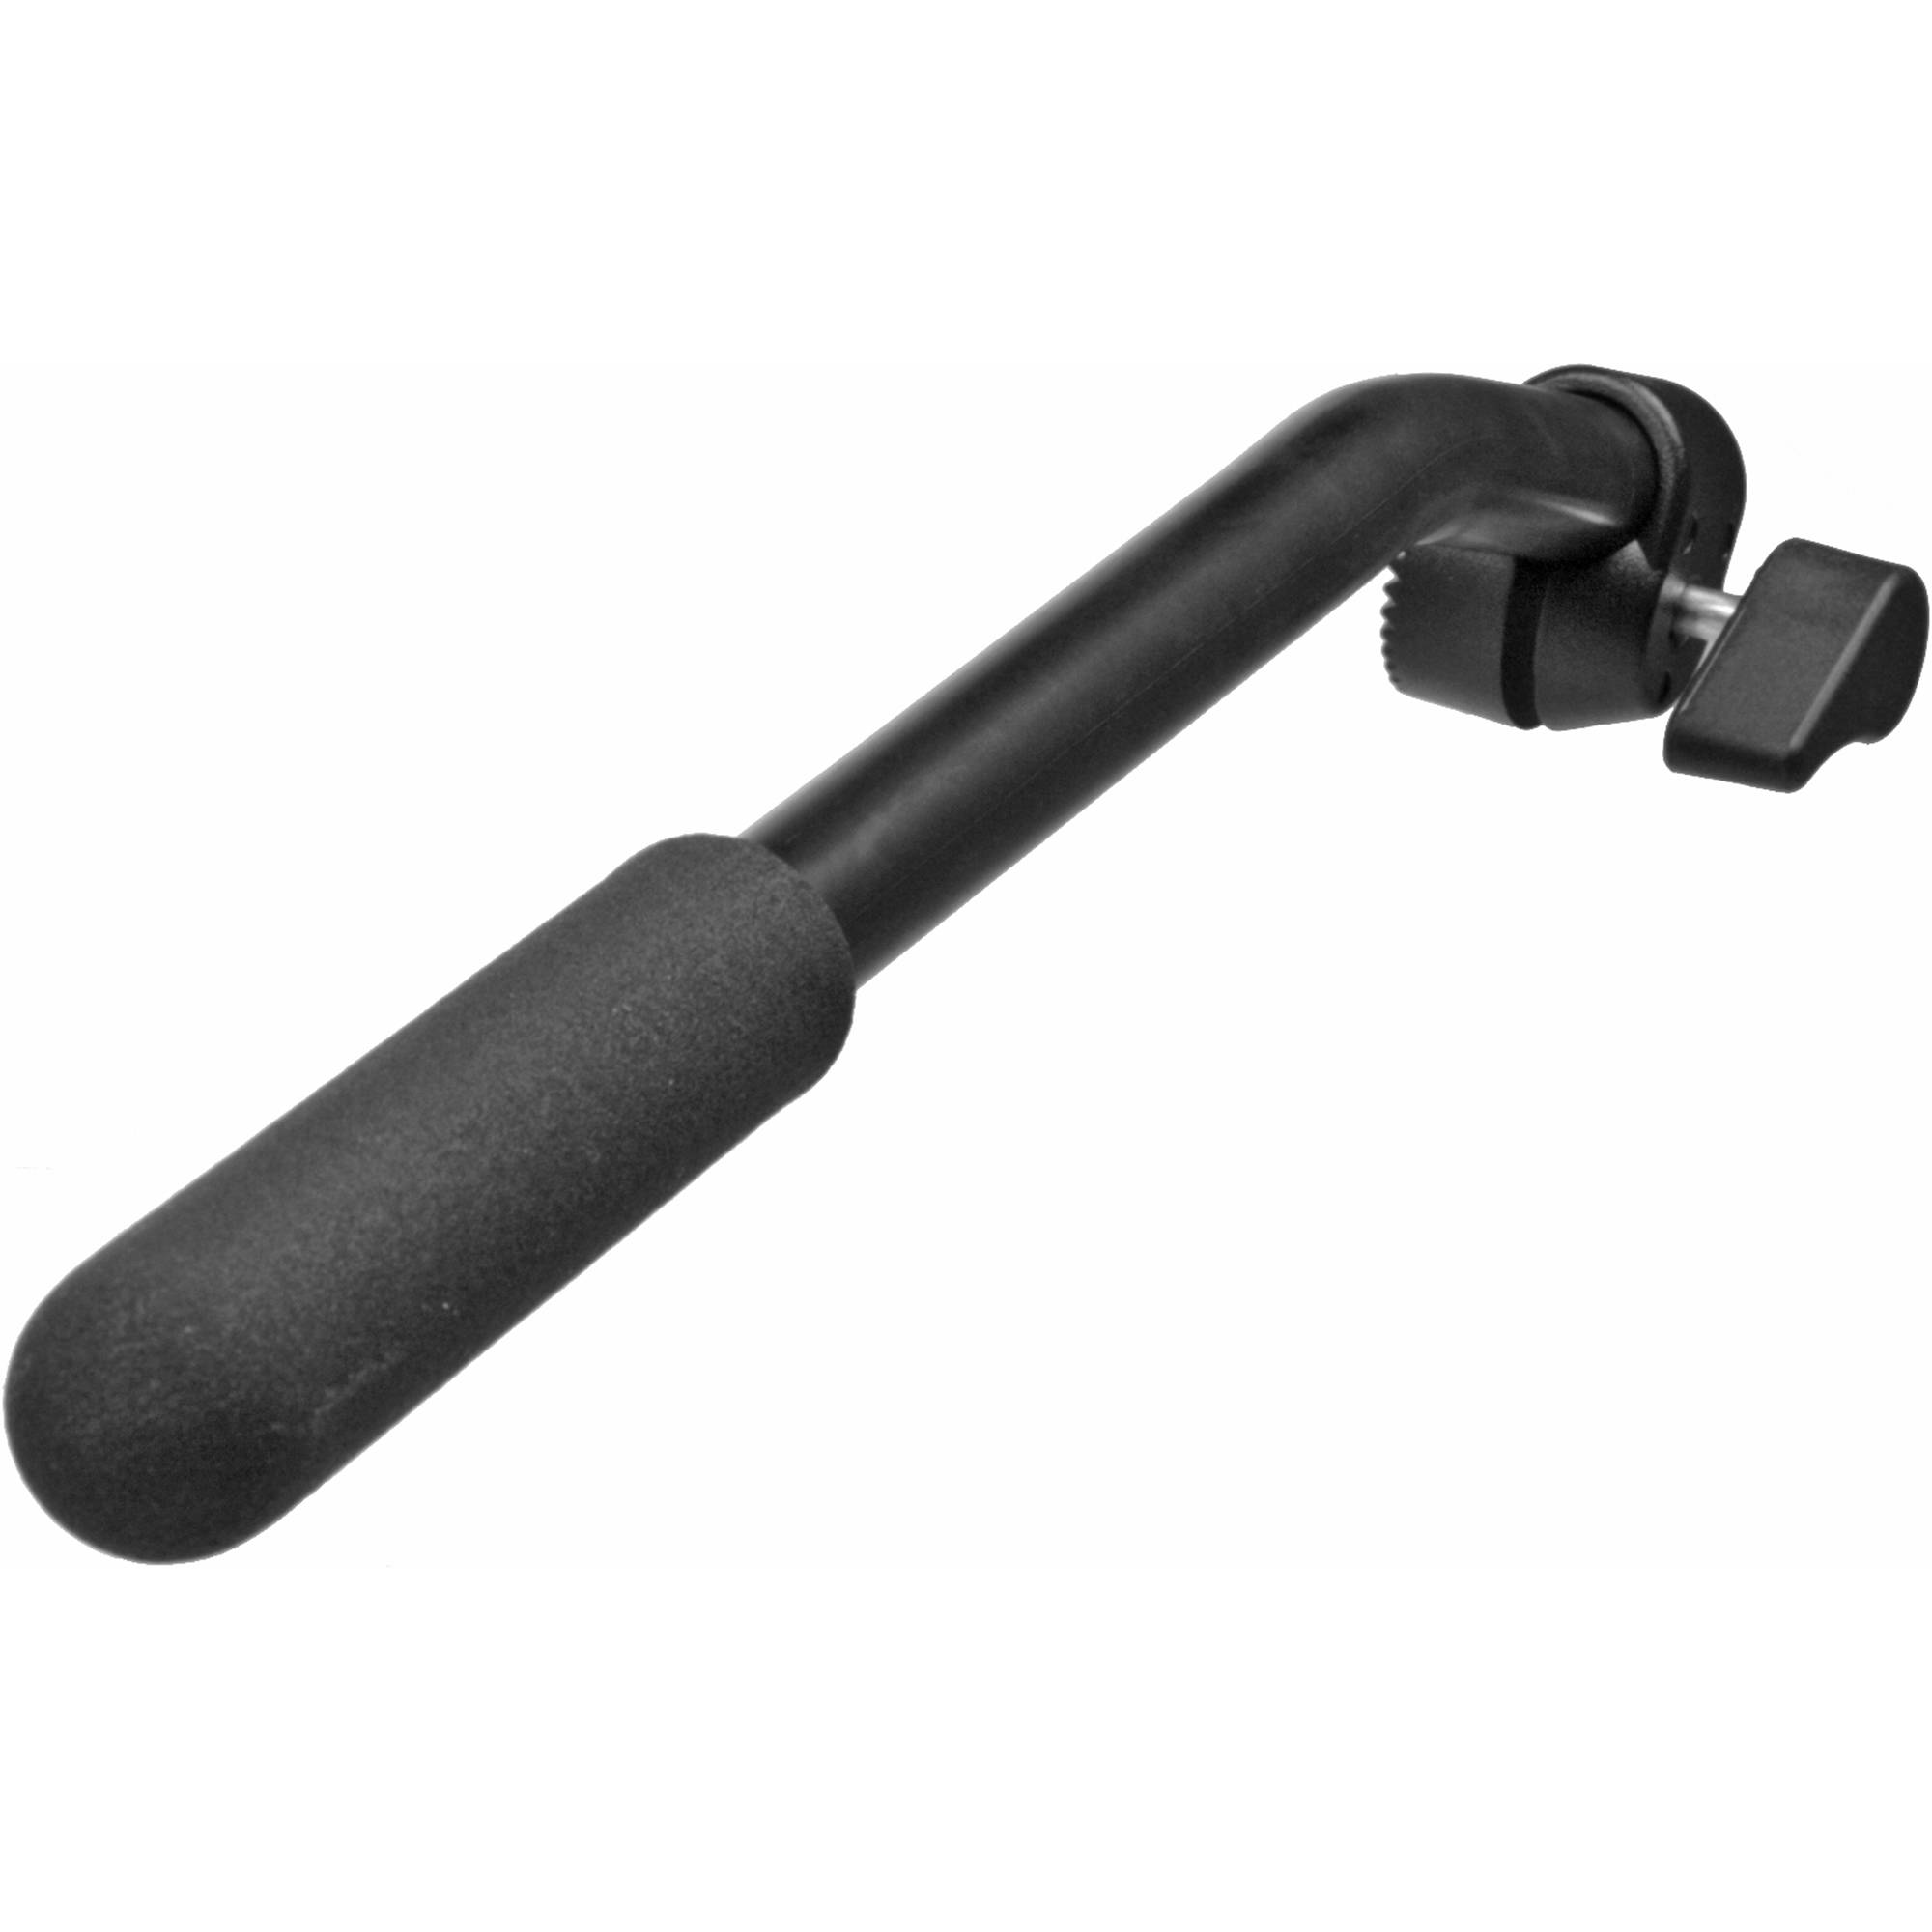 Manfrotto 501HLV Pan Handle Manfrotto Video Head